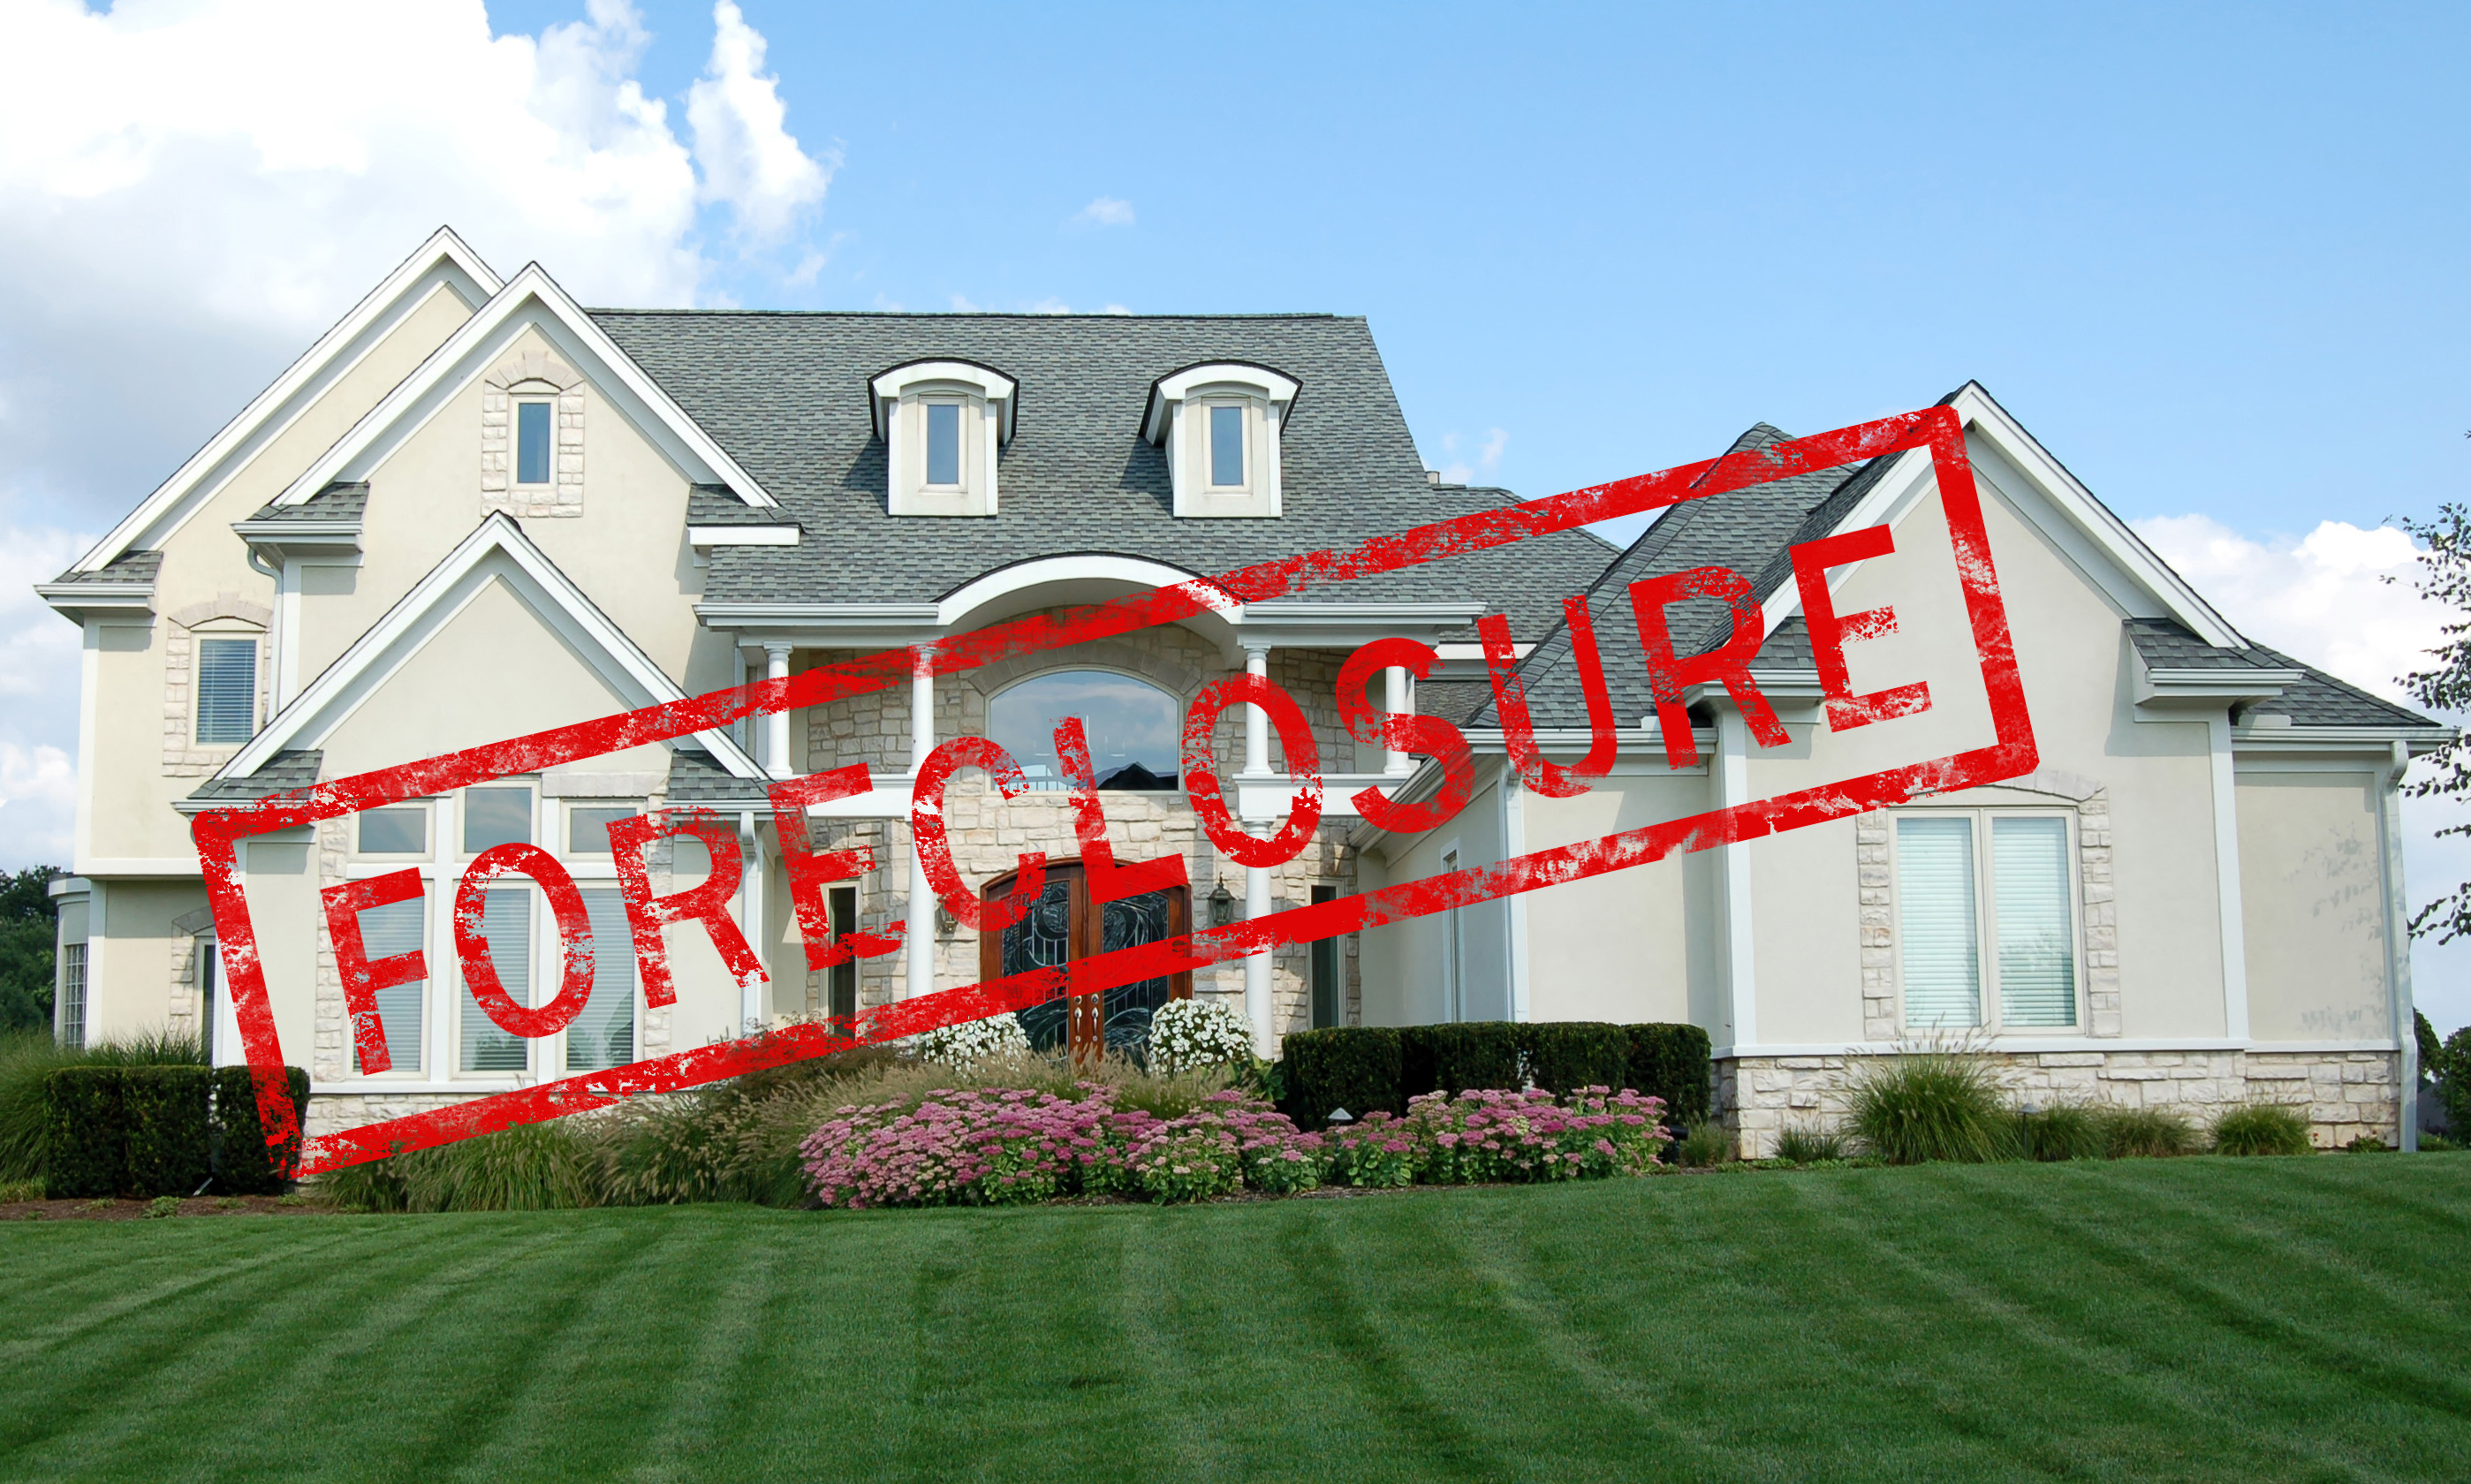 Call Timely Appraisal Services to discuss valuations regarding Hunt foreclosures